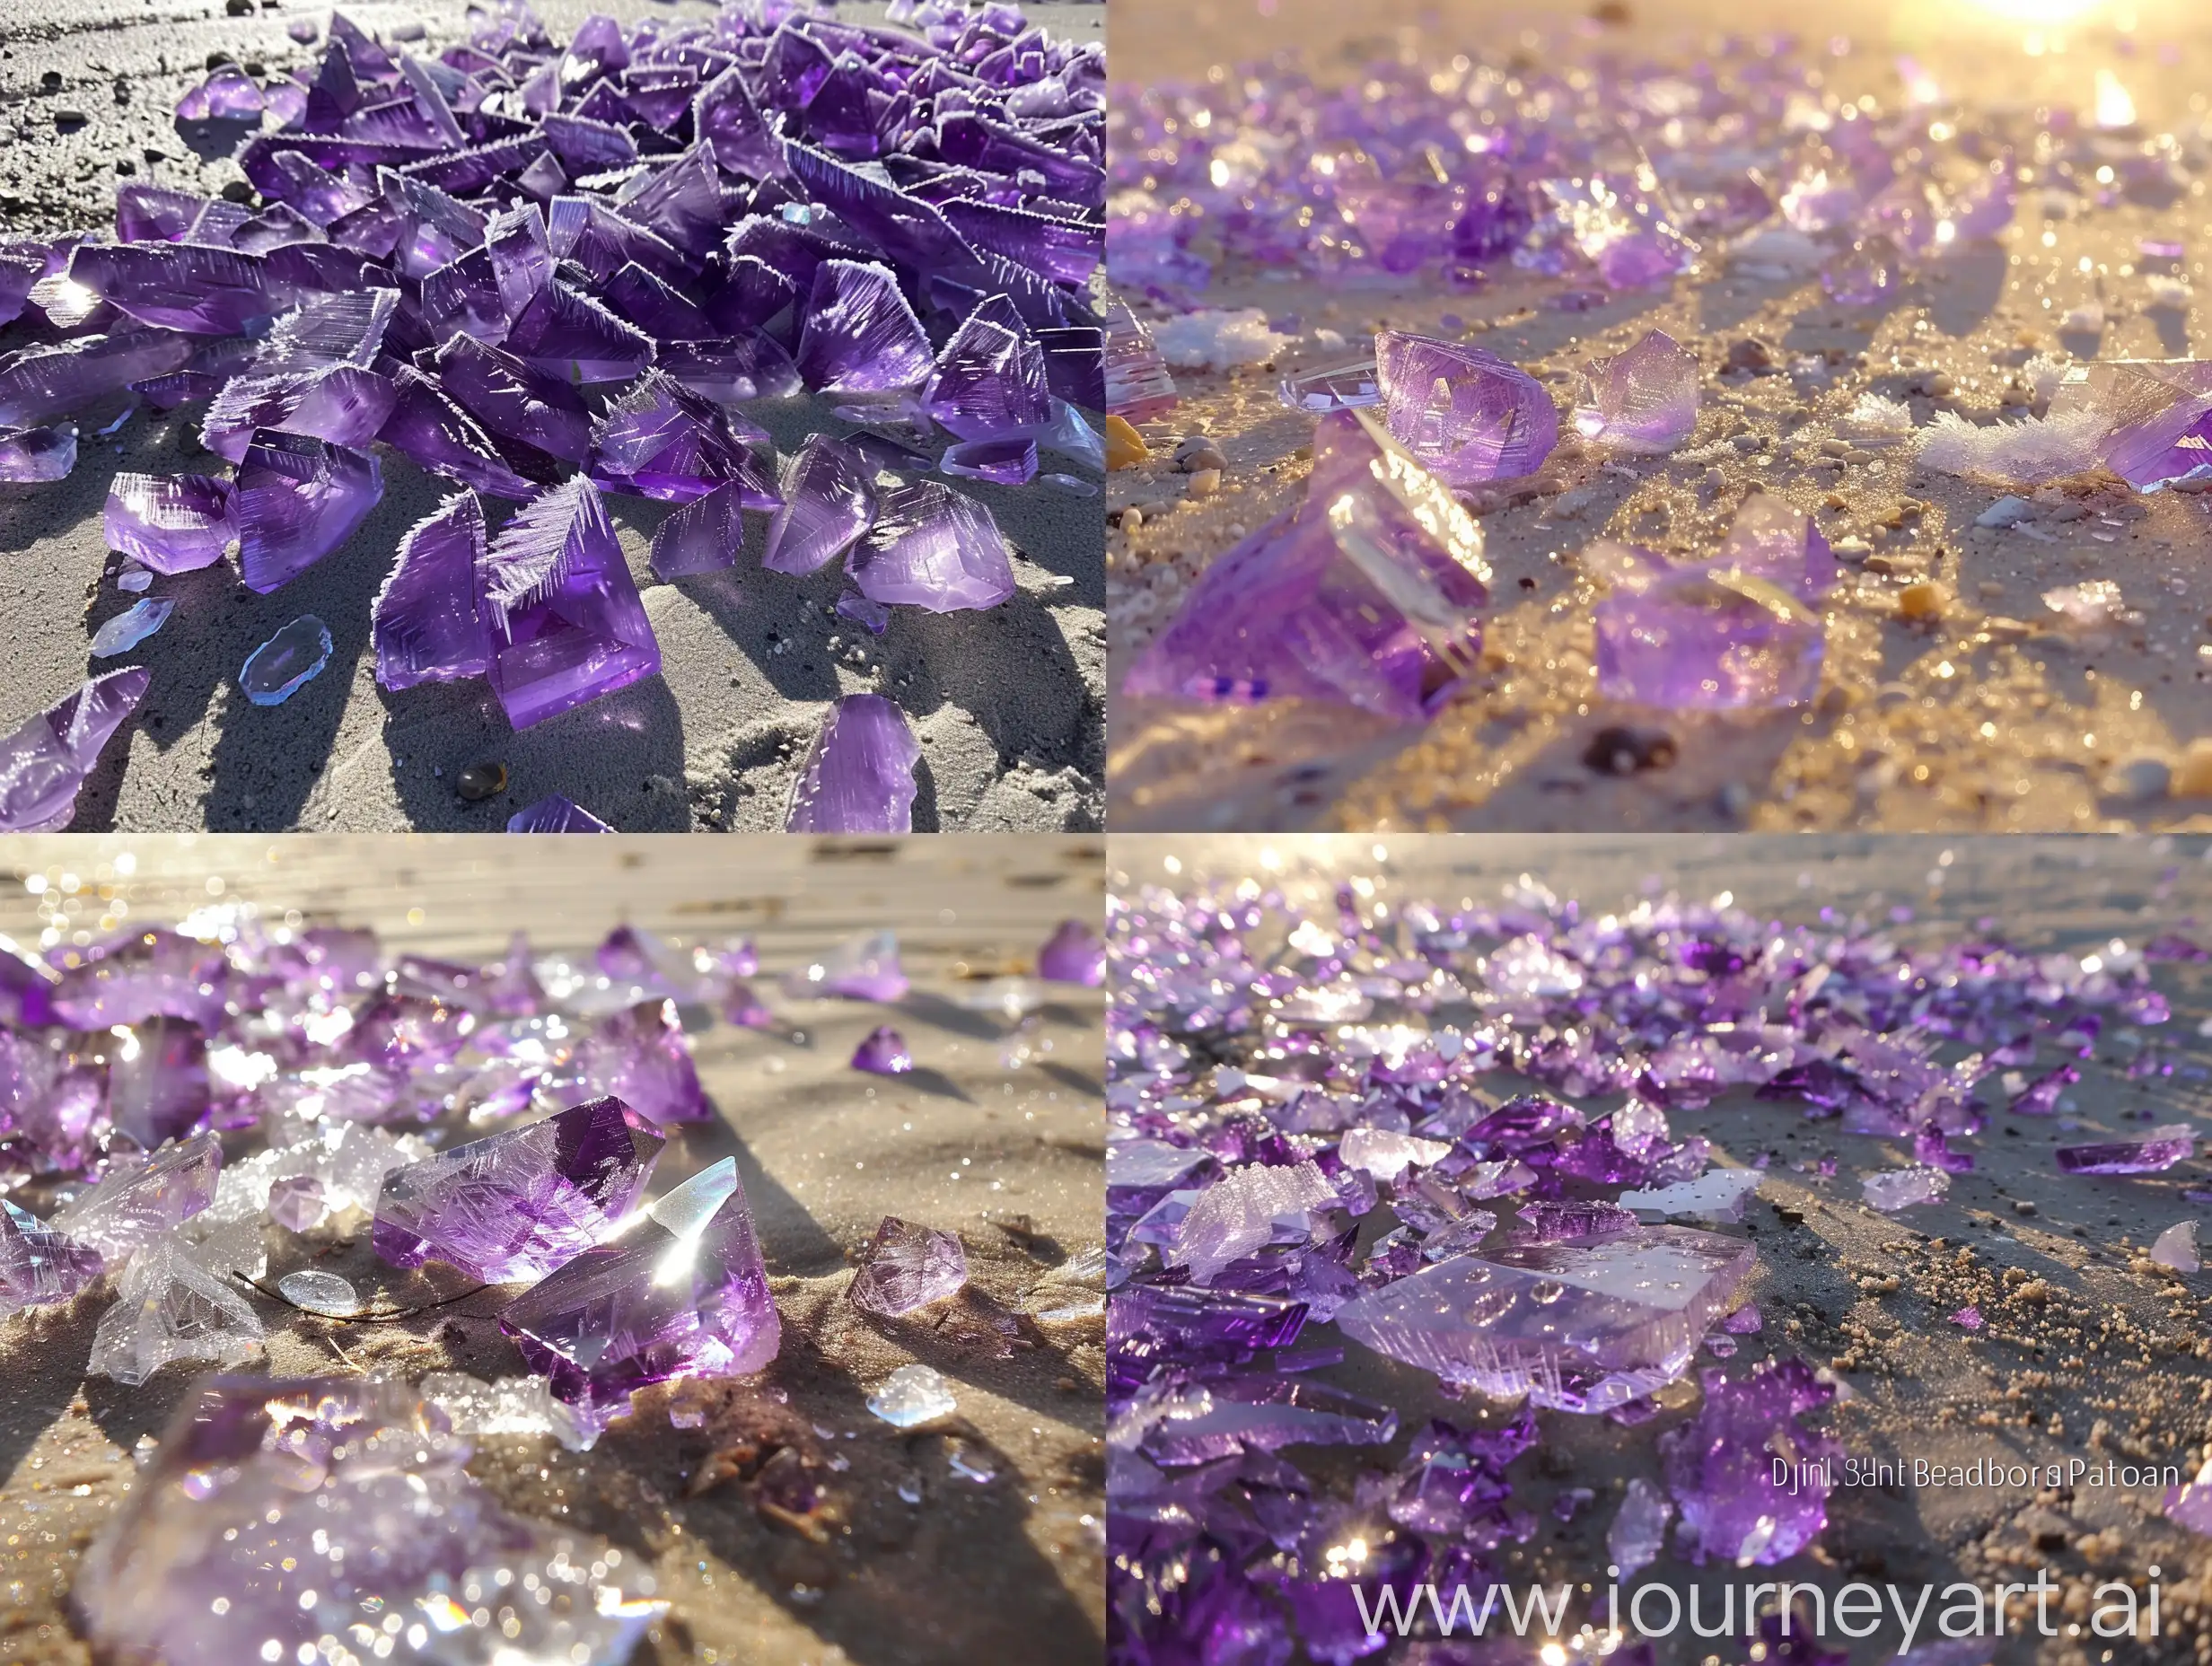  It was kind of a beautiful sight, in which the purple glass crystal particles mixed with the ice flakes that were shining due to the sunlight. Sandy ground, Empty place.